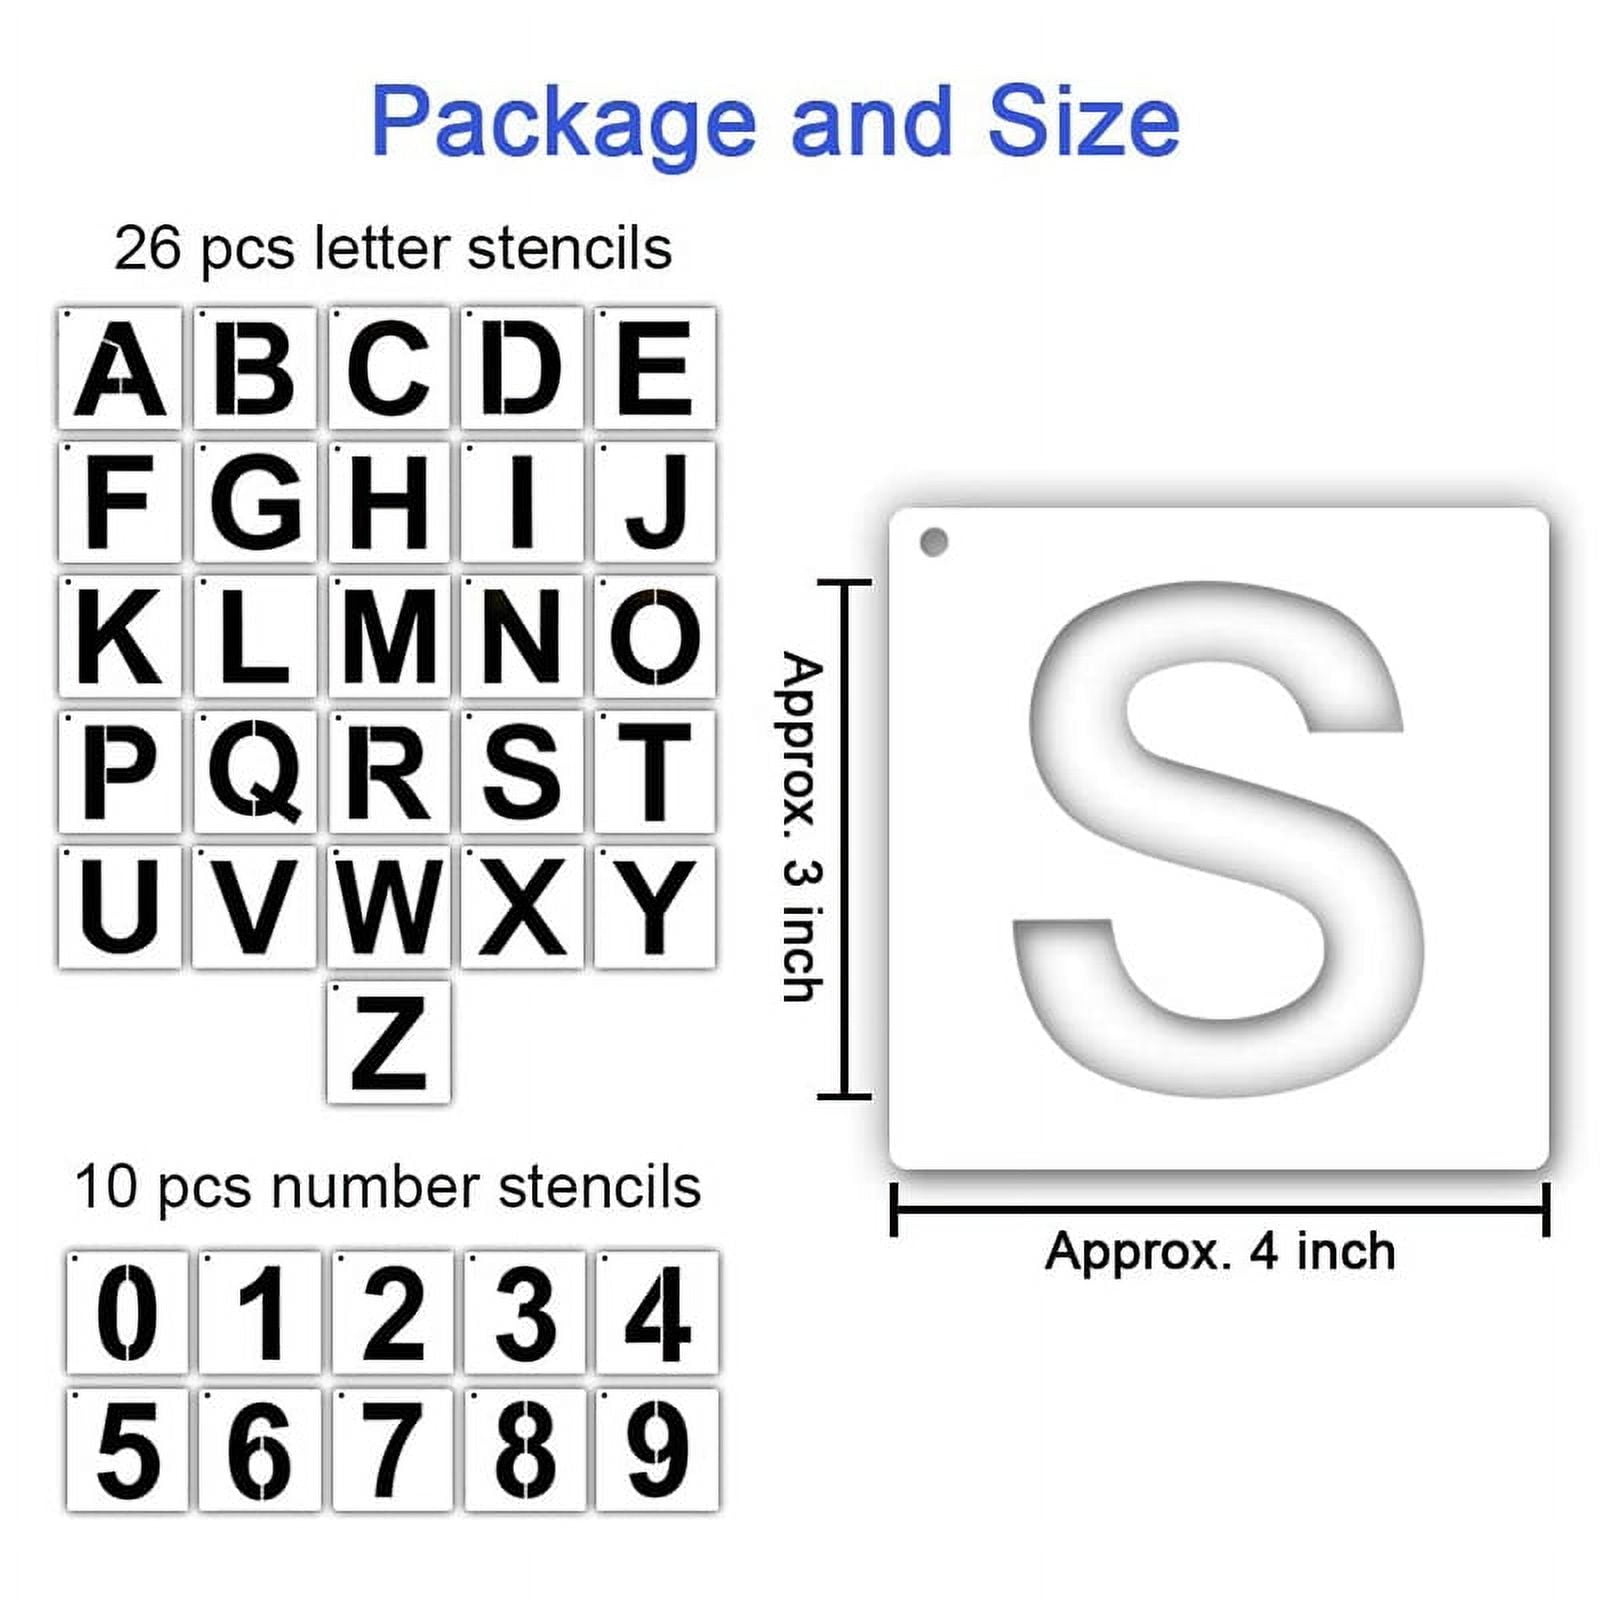 Letter Stencils for Painting on Wood 36 Pcs Letter and Number Stencils  Reusable Font Templates for Home 